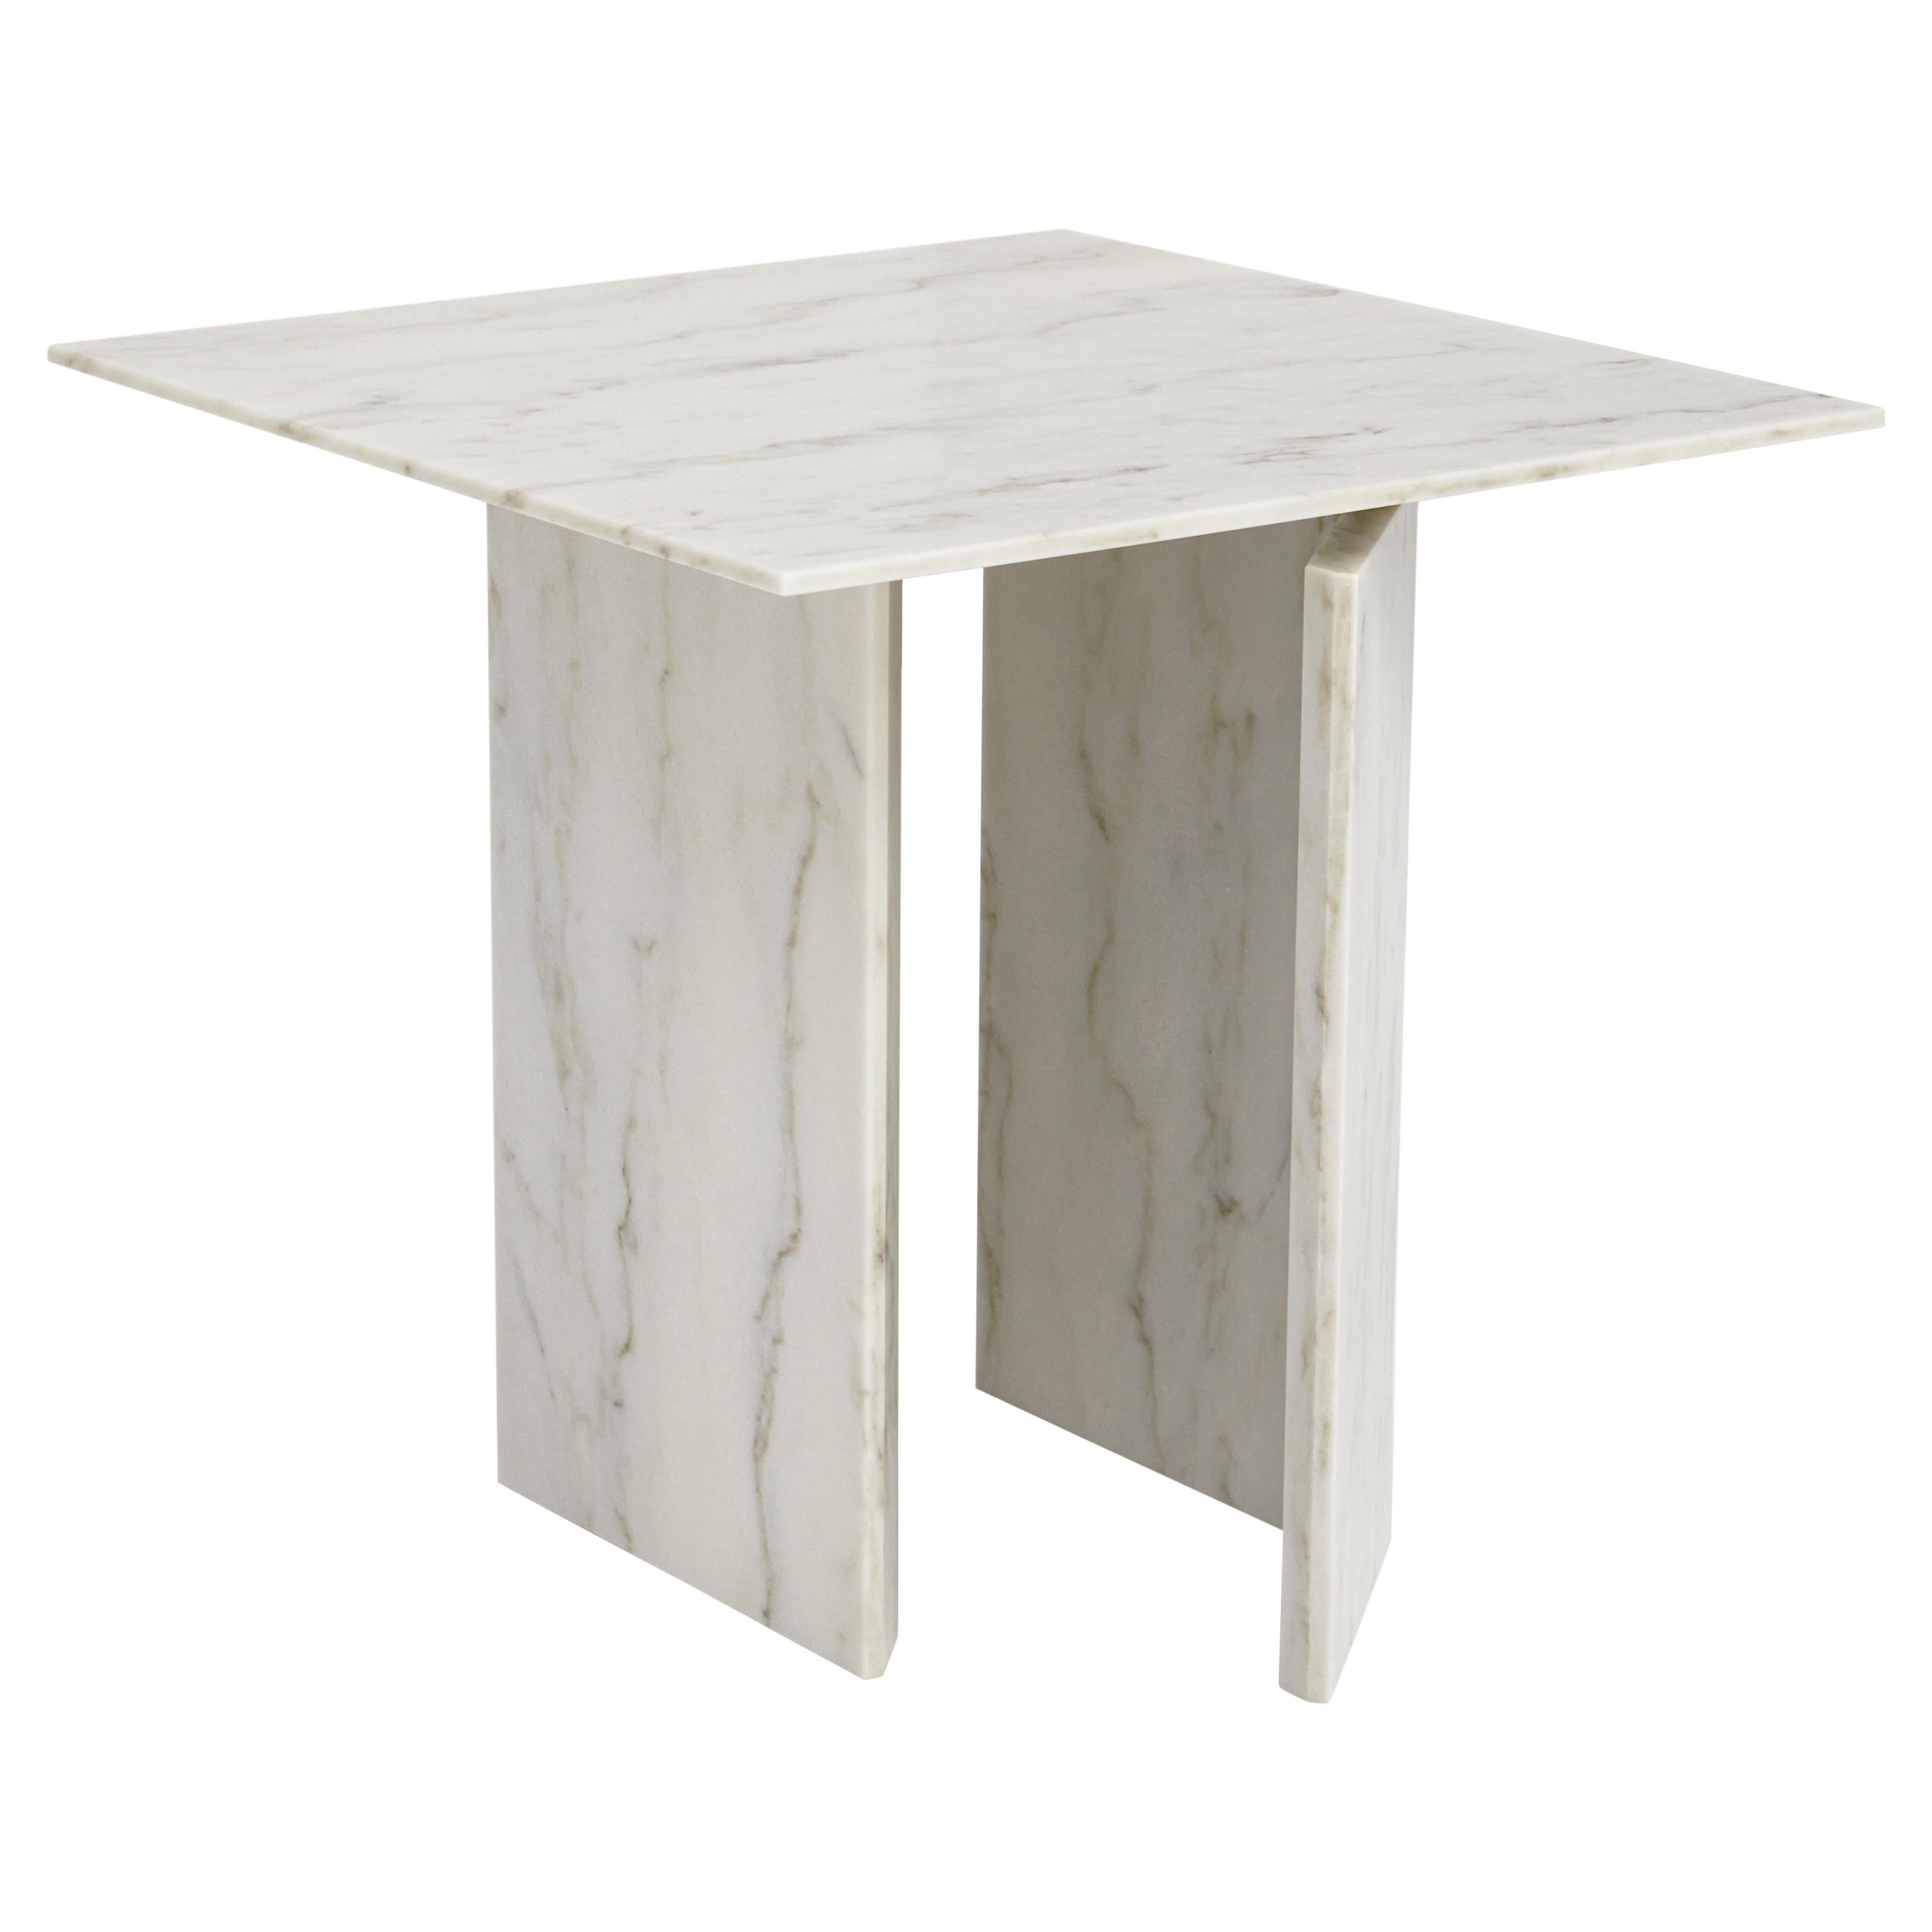 Contemporary Side Table 'Theorem' by Marta Delgado, White Marble